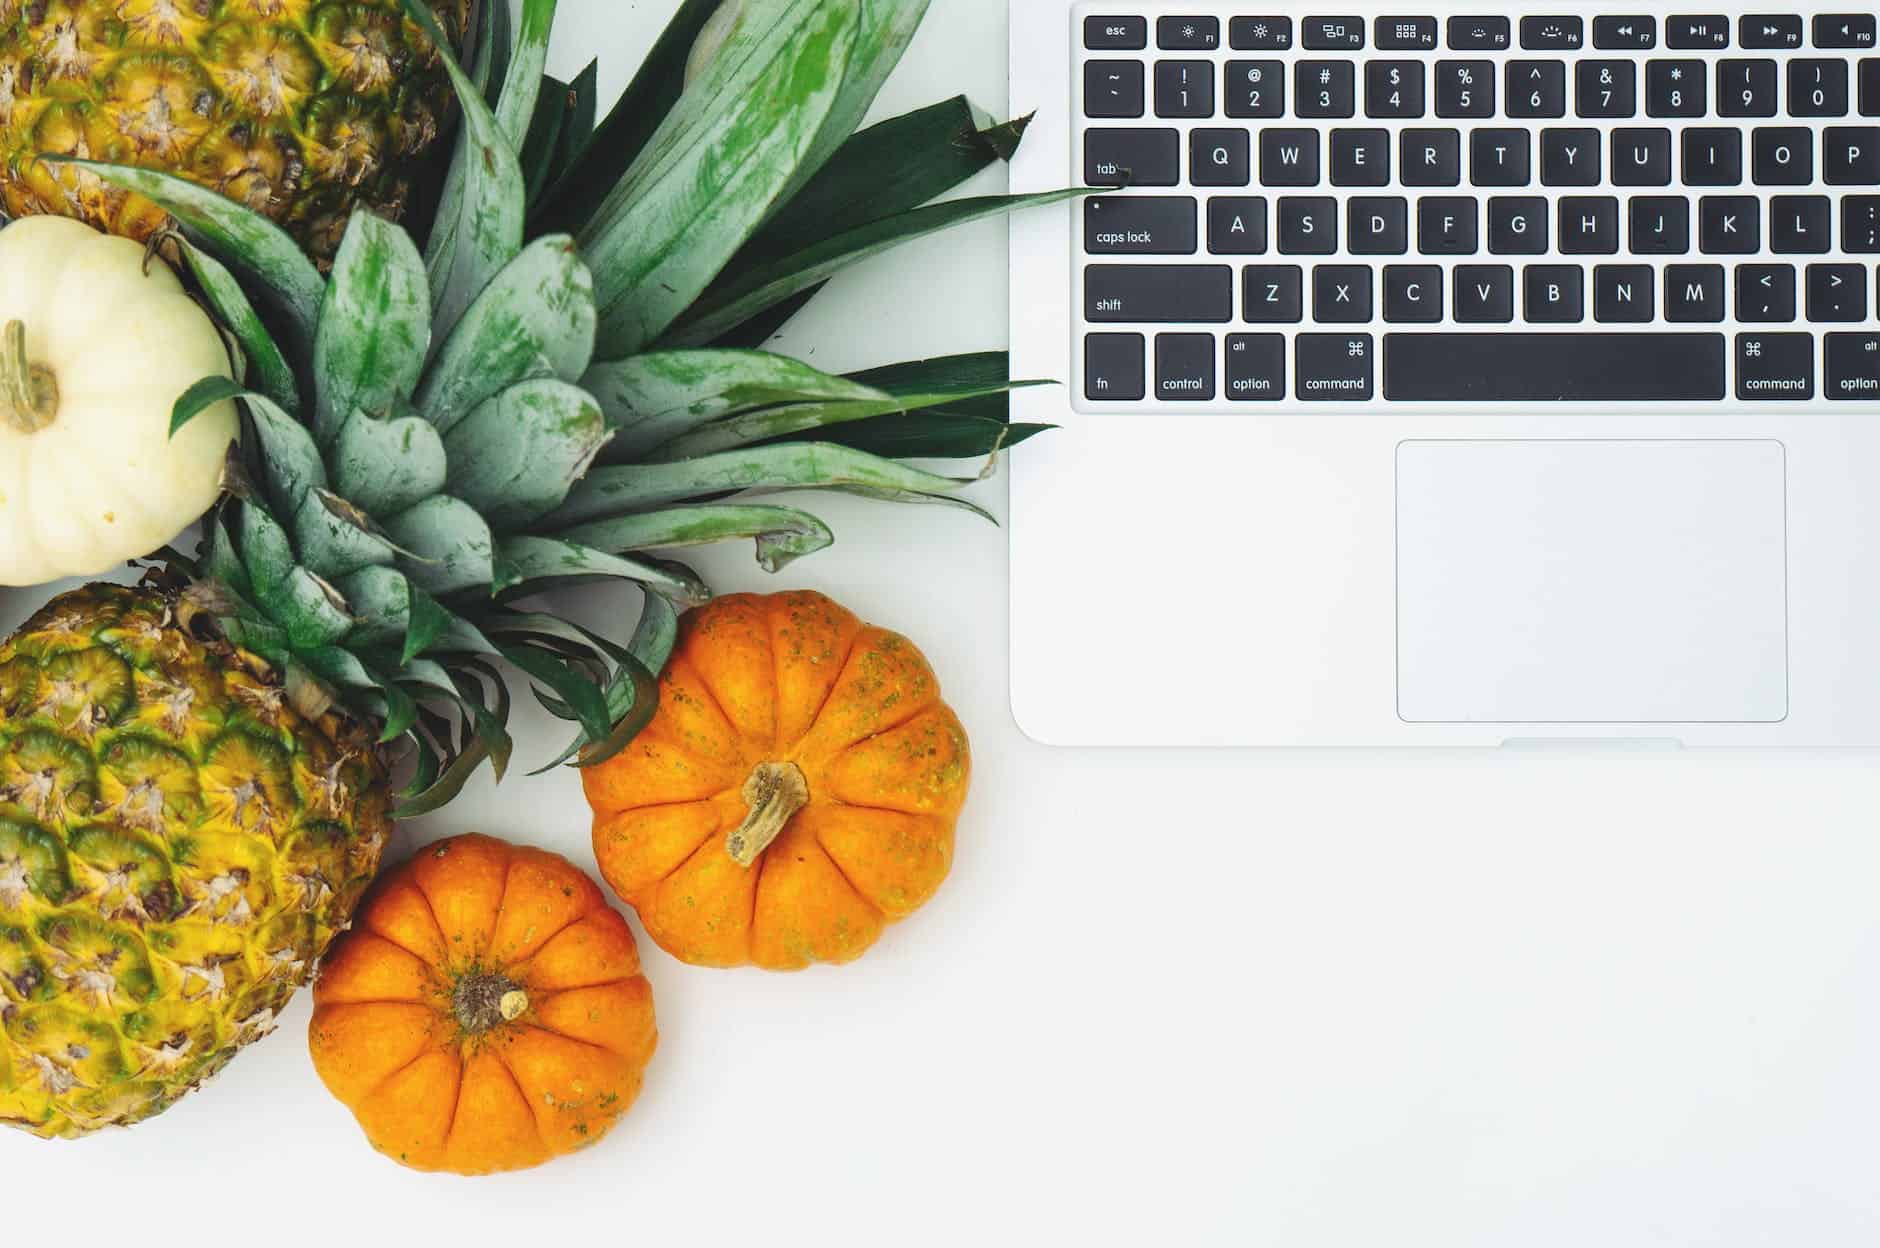 pumpkins and pineapple next to laptop